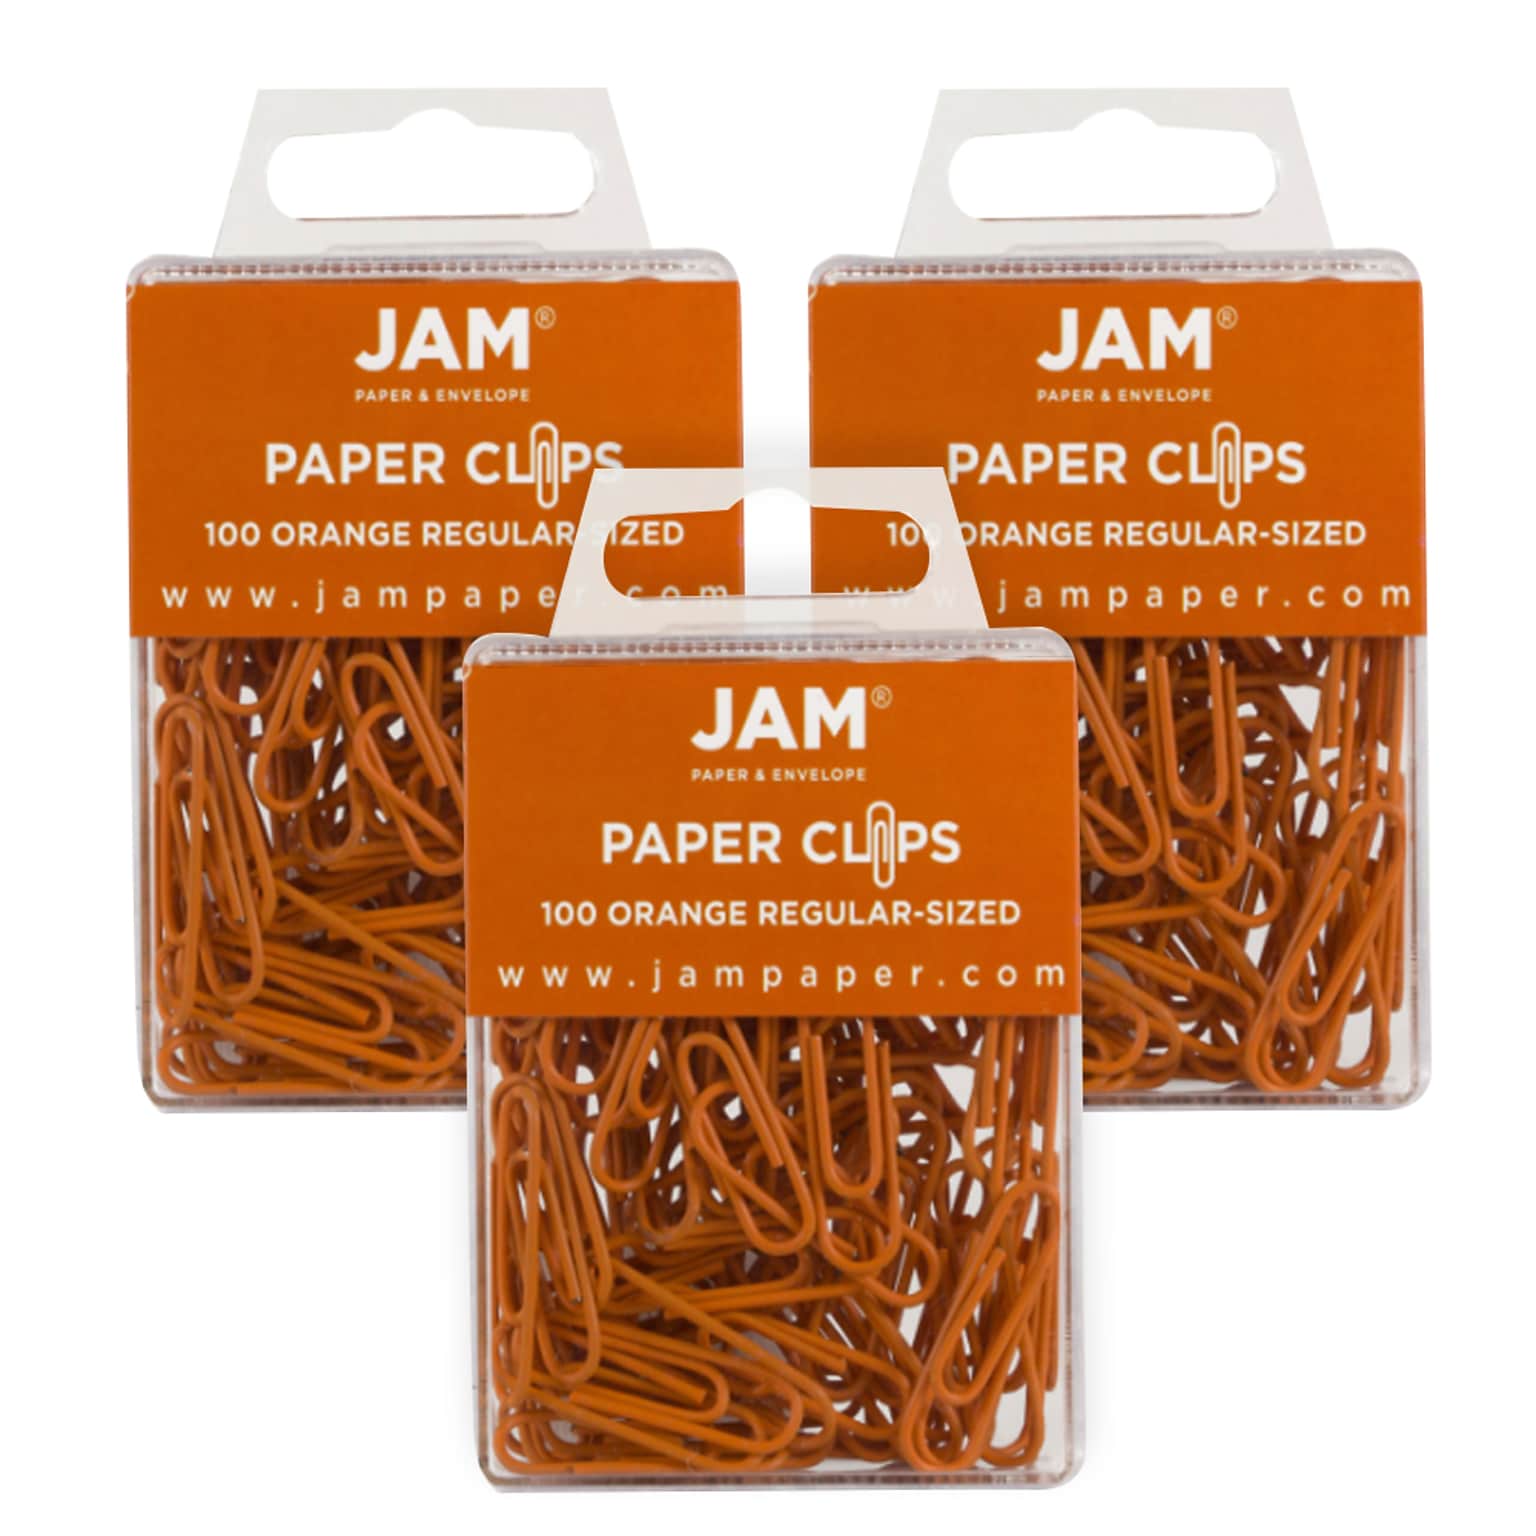 JAM Paper® Colored Standard Paper Clips, Small 1 Inch, Orange Paperclips, 3 Packs of 100 (42186870B)